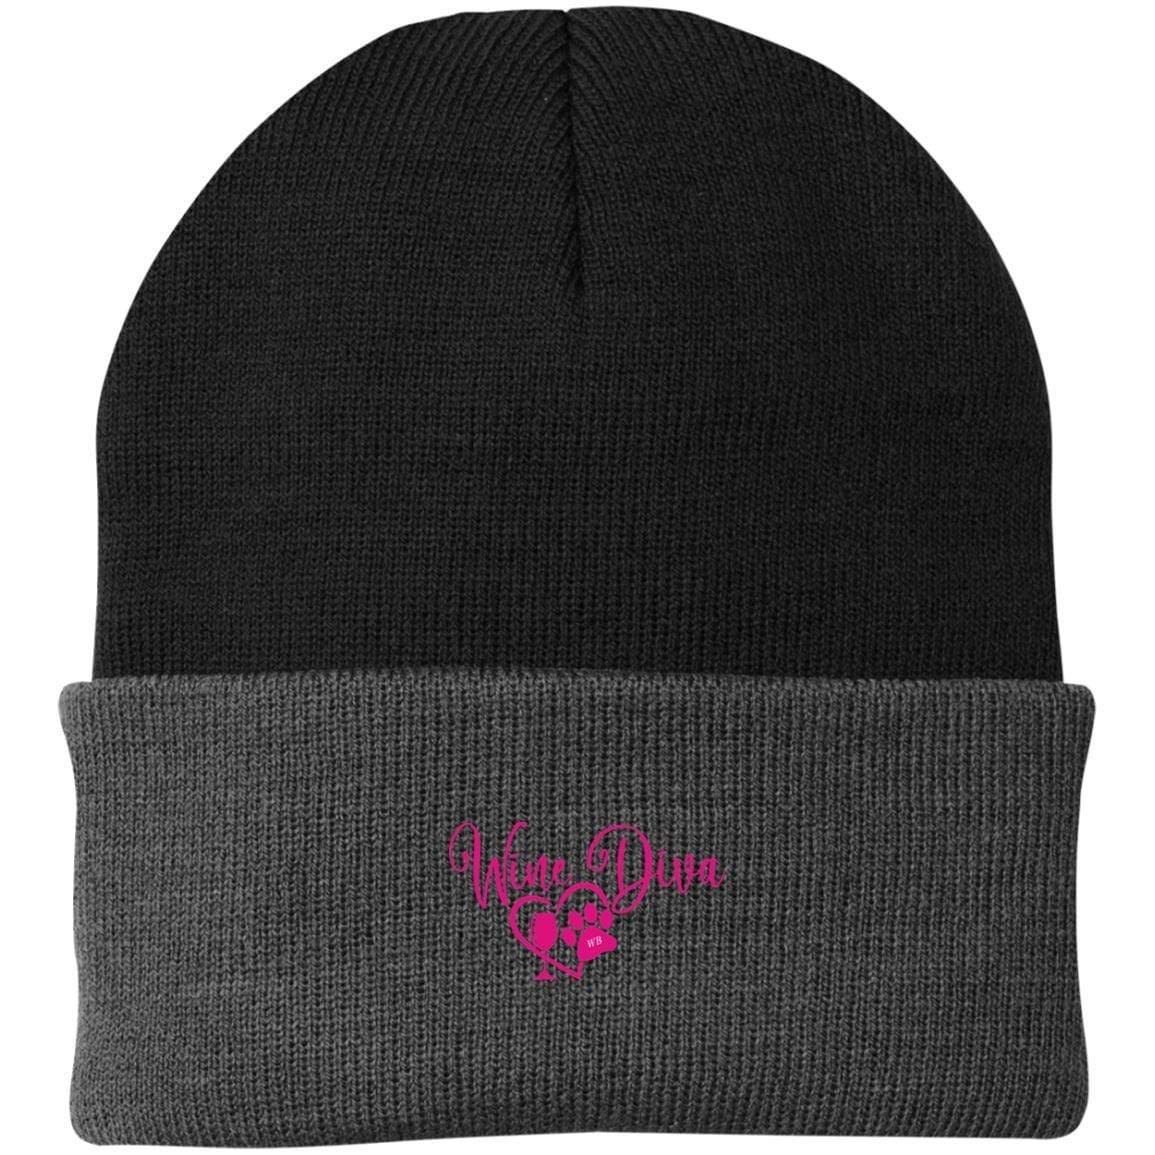 Hats Black/Athletic Oxford / One Size Winey Bitches Co "Wine Diva" Embroidered Knit Cap WineyBitchesCo